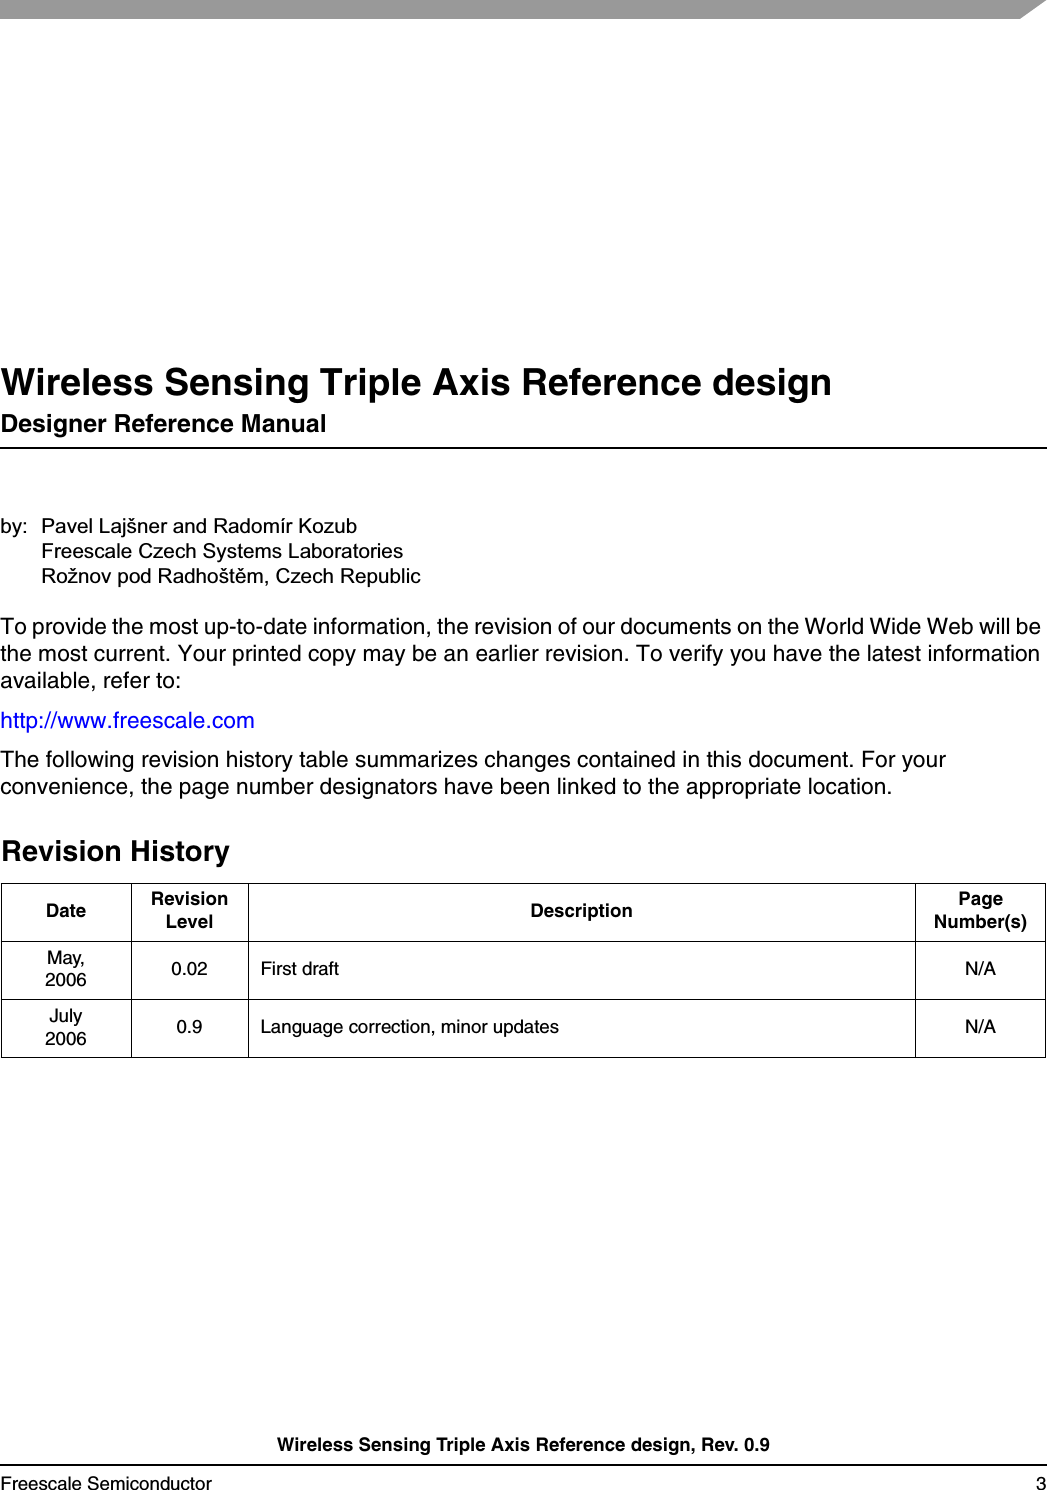 Wireless Sensing Triple Axis Reference design, Rev. 0.9Freescale Semiconductor 3Wireless Sensing Triple Axis Reference designDesigner Reference Manualby: Pavel Lajšner and Radomír KozubFreescale Czech Systems LaboratoriesRožnov pod RadhoštČm, Czech RepublicTo provide the most up-to-date information, the revision of our documents on the World Wide Web will be the most current. Your printed copy may be an earlier revision. To verify you have the latest information available, refer to:http://www.freescale.comThe following revision history table summarizes changes contained in this document. For your convenience, the page number designators have been linked to the appropriate location.Revision HistoryDate RevisionLevel Description PageNumber(s)May,2006 0.02 First draft N/AJuly2006 0.9 Language correction, minor updates N/A